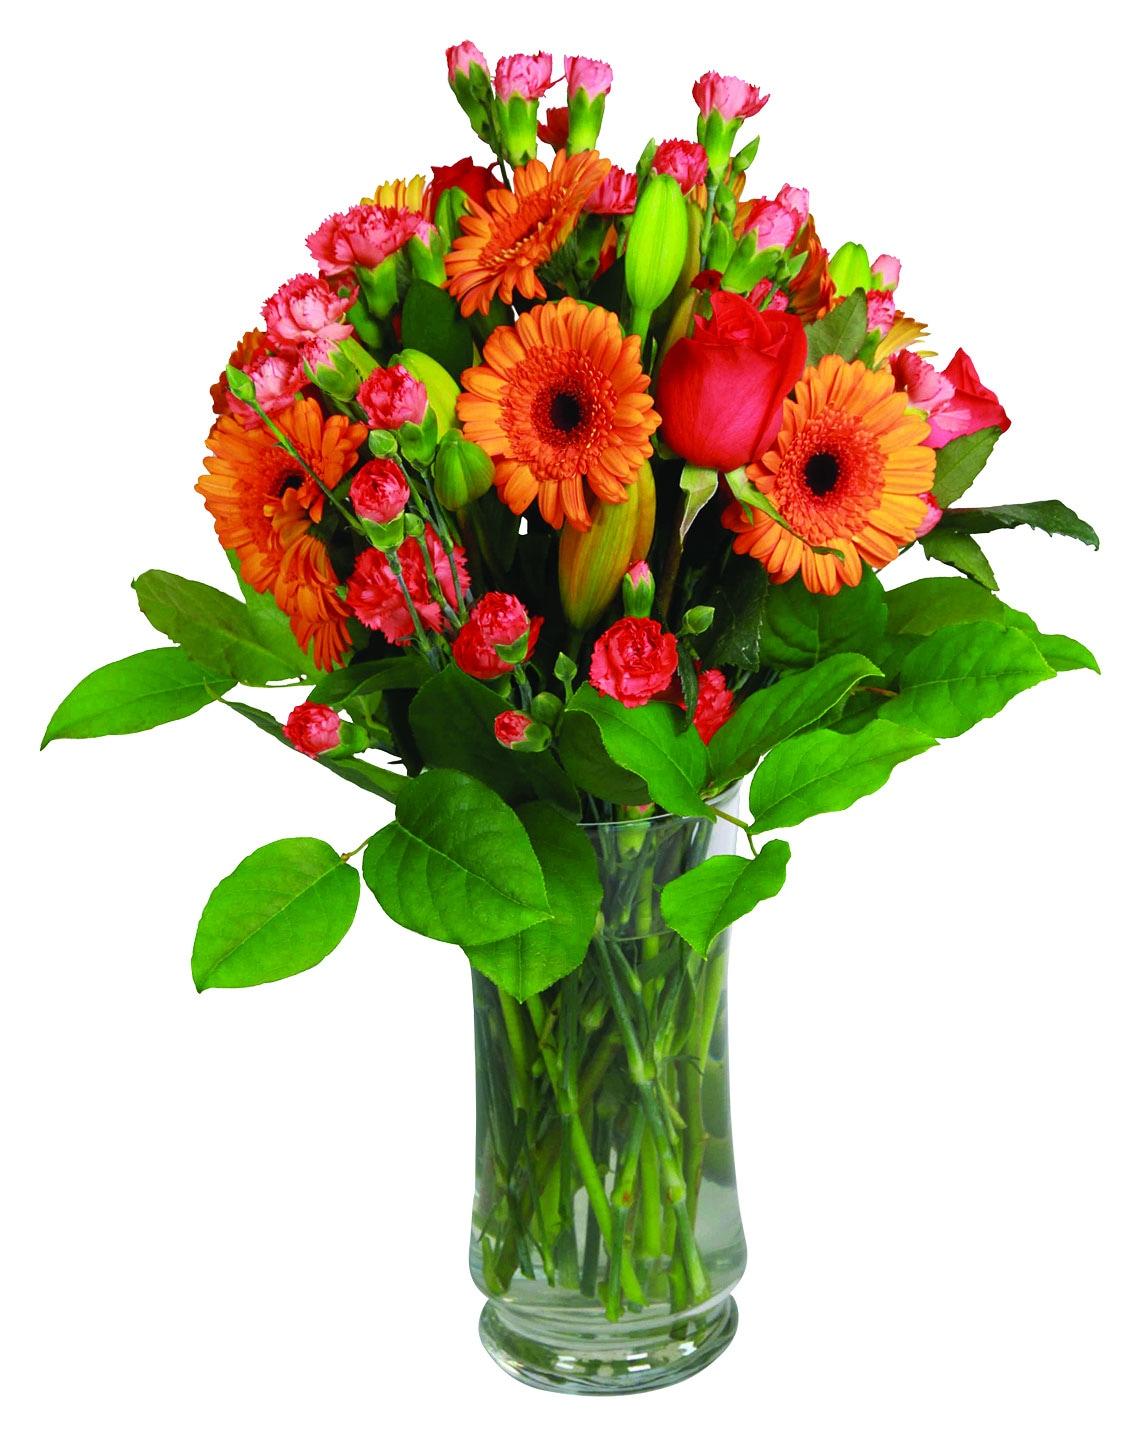 A vase arrangement with orange roses, gerberas, mini carnations, lilies, greens and fillers.